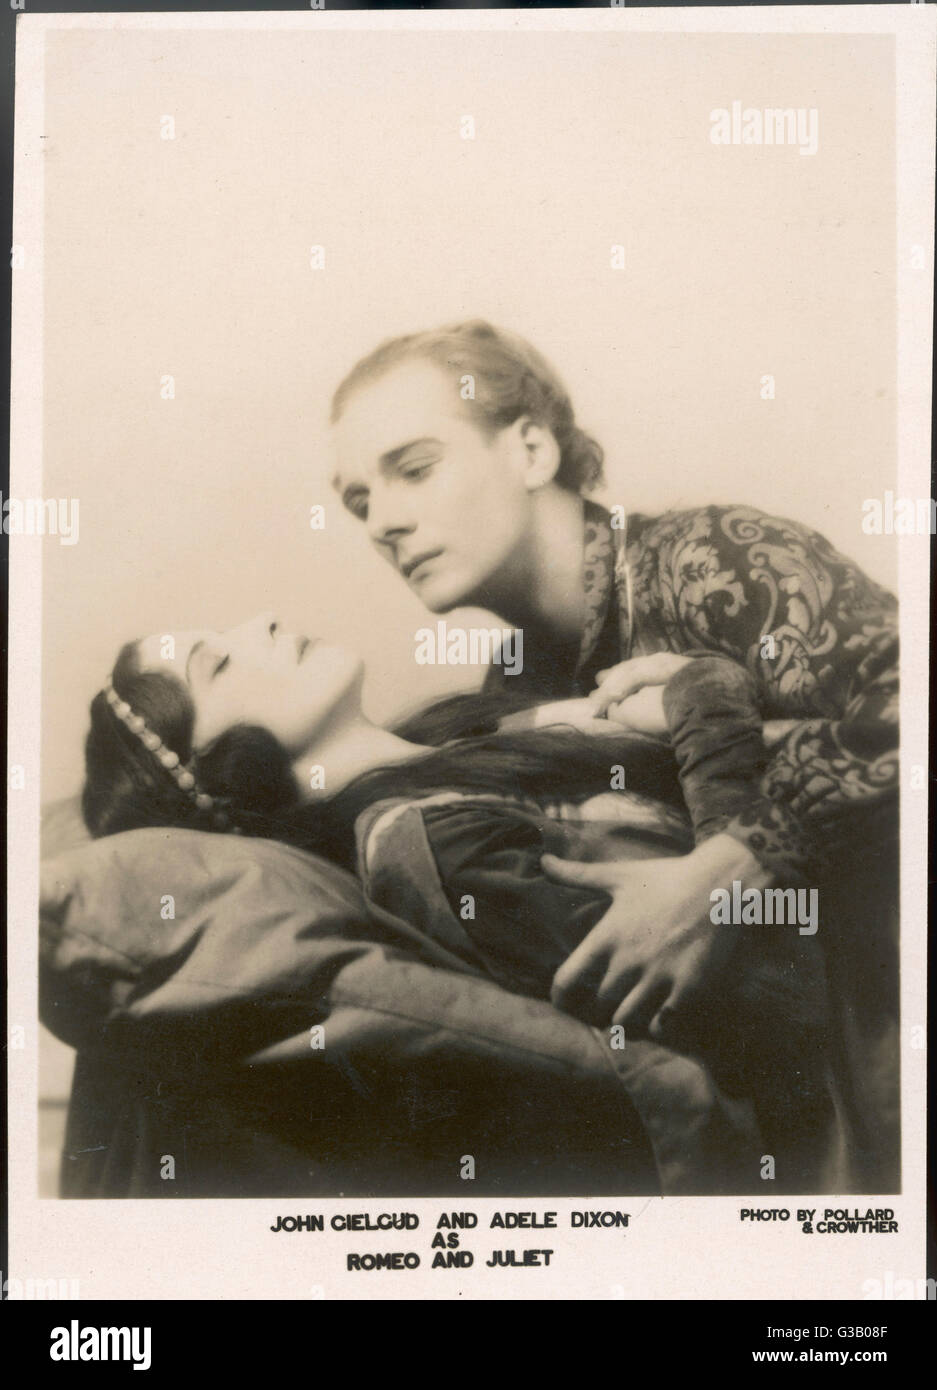 JOHN GIELGUD  British actor of stage  and film, with Adele Dixon  in the final scene of  'Romeo and Juliet'     Date: 1904 - 2000 Stock Photo